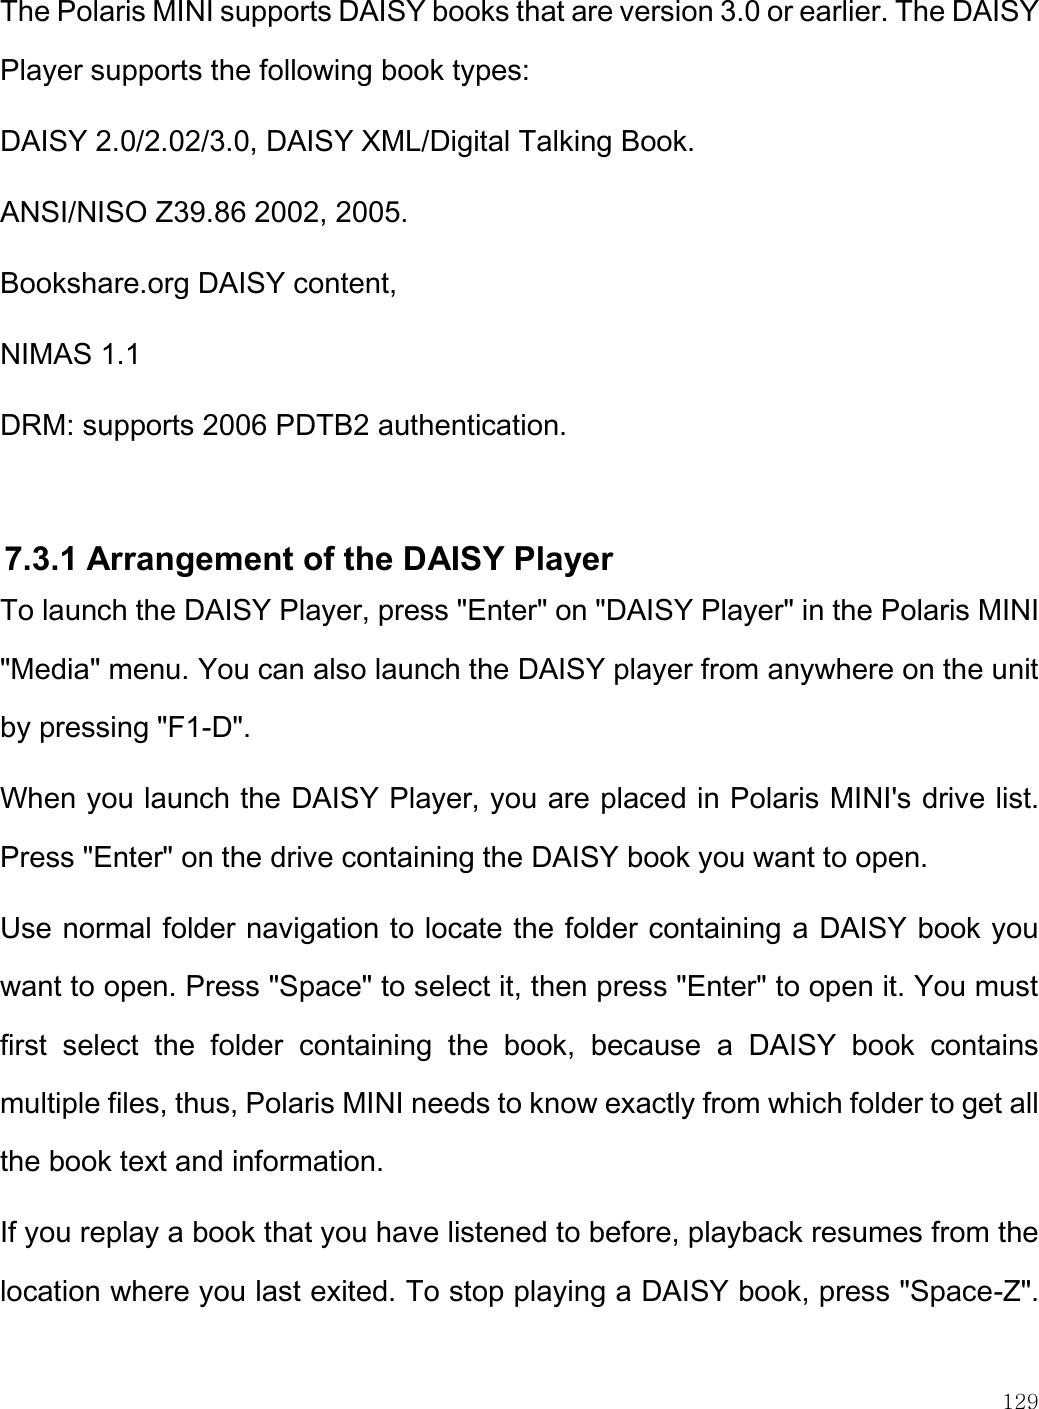    129  The Polaris MINI supports DAISY books that are version 3.0 or earlier. The DAISY Player supports the following book types: DAISY 2.0/2.02/3.0, DAISY XML/Digital Talking Book. ANSI/NISO Z39.86 2002, 2005. Bookshare.org DAISY content,  NIMAS 1.1  DRM: supports 2006 PDTB2 authentication.   7.3.1 Arrangement of the DAISY Player To launch the DAISY Player, press &quot;Enter&quot; on &quot;DAISY Player&quot; in the Polaris MINI &quot;Media&quot; menu. You can also launch the DAISY player from anywhere on the unit by pressing &quot;F1-D&quot;.  When you launch the DAISY Player, you are placed in Polaris MINI&apos;s drive list. Press &quot;Enter&quot; on the drive containing the DAISY book you want to open. Use normal folder navigation to locate the folder containing a DAISY book you want to open. Press &quot;Space&quot; to select it, then press &quot;Enter&quot; to open it. You must first  select  the  folder  containing  the  book,  because  a  DAISY  book  contains multiple files, thus, Polaris MINI needs to know exactly from which folder to get all the book text and information.  If you replay a book that you have listened to before, playback resumes from the location where you last exited. To stop playing a DAISY book, press &quot;Space-Z&quot;. 